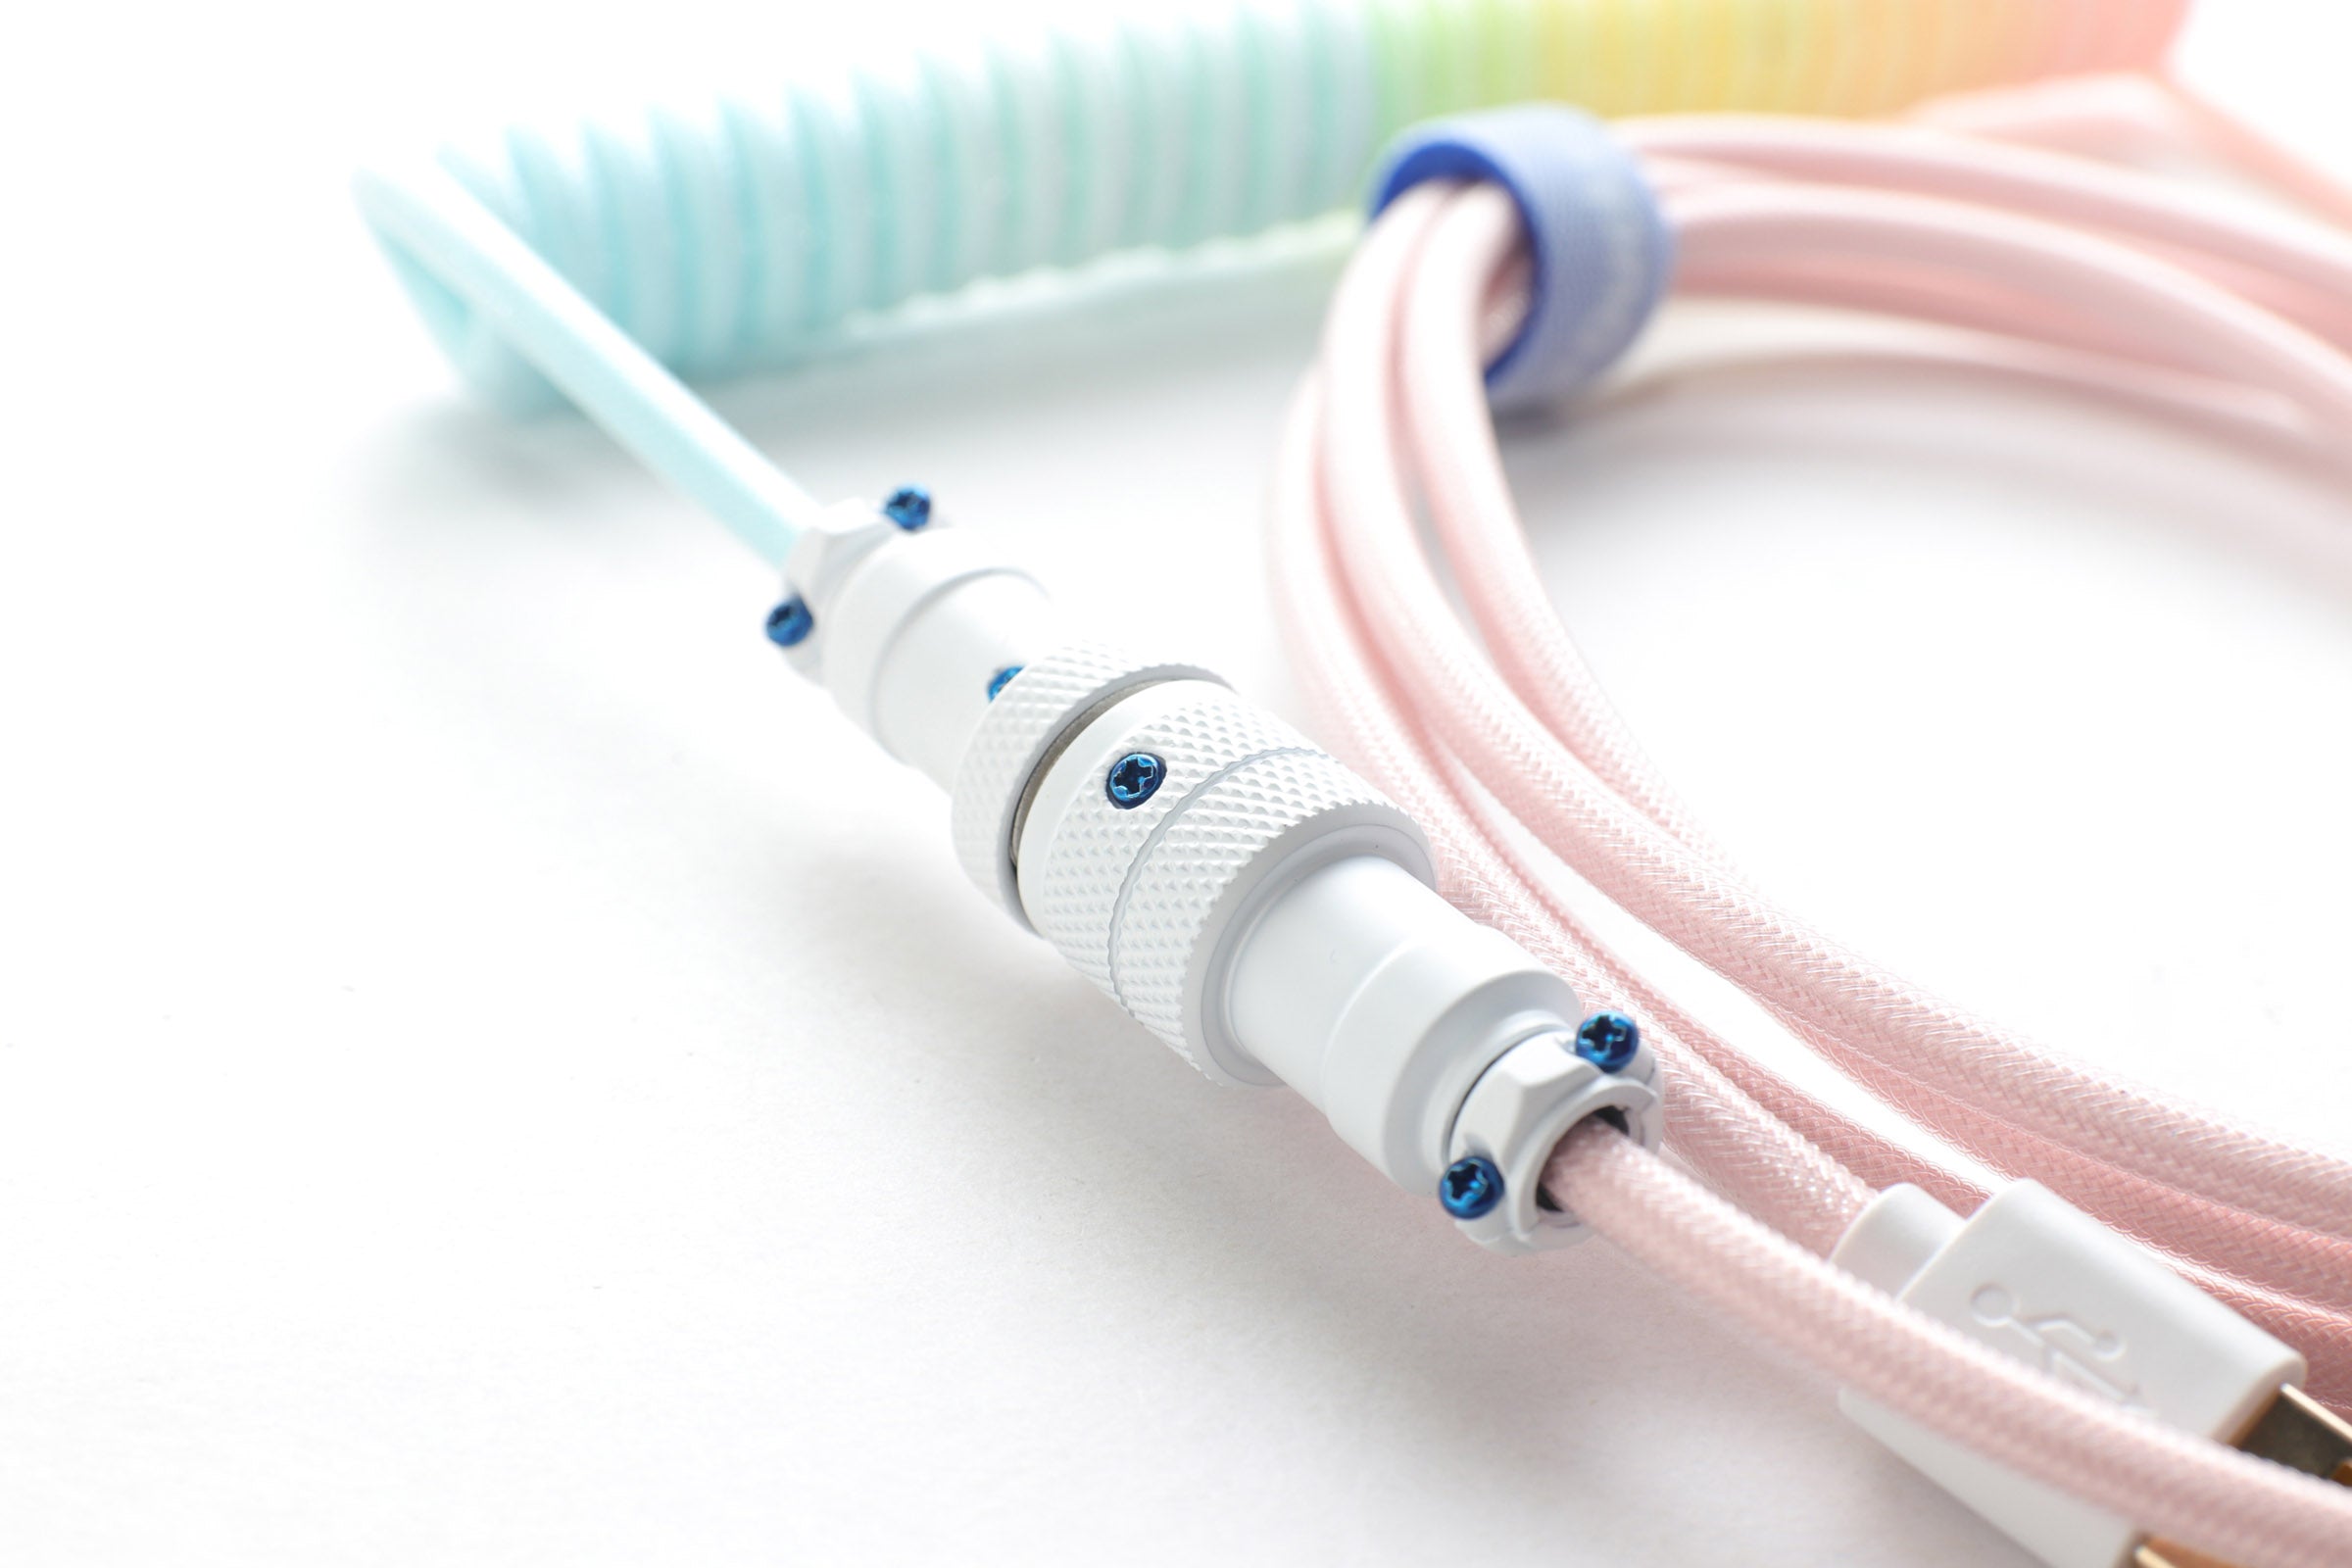 Ducky Cotton Candy Coiled USB Cable V2 MK2JAWHTWV |40284|